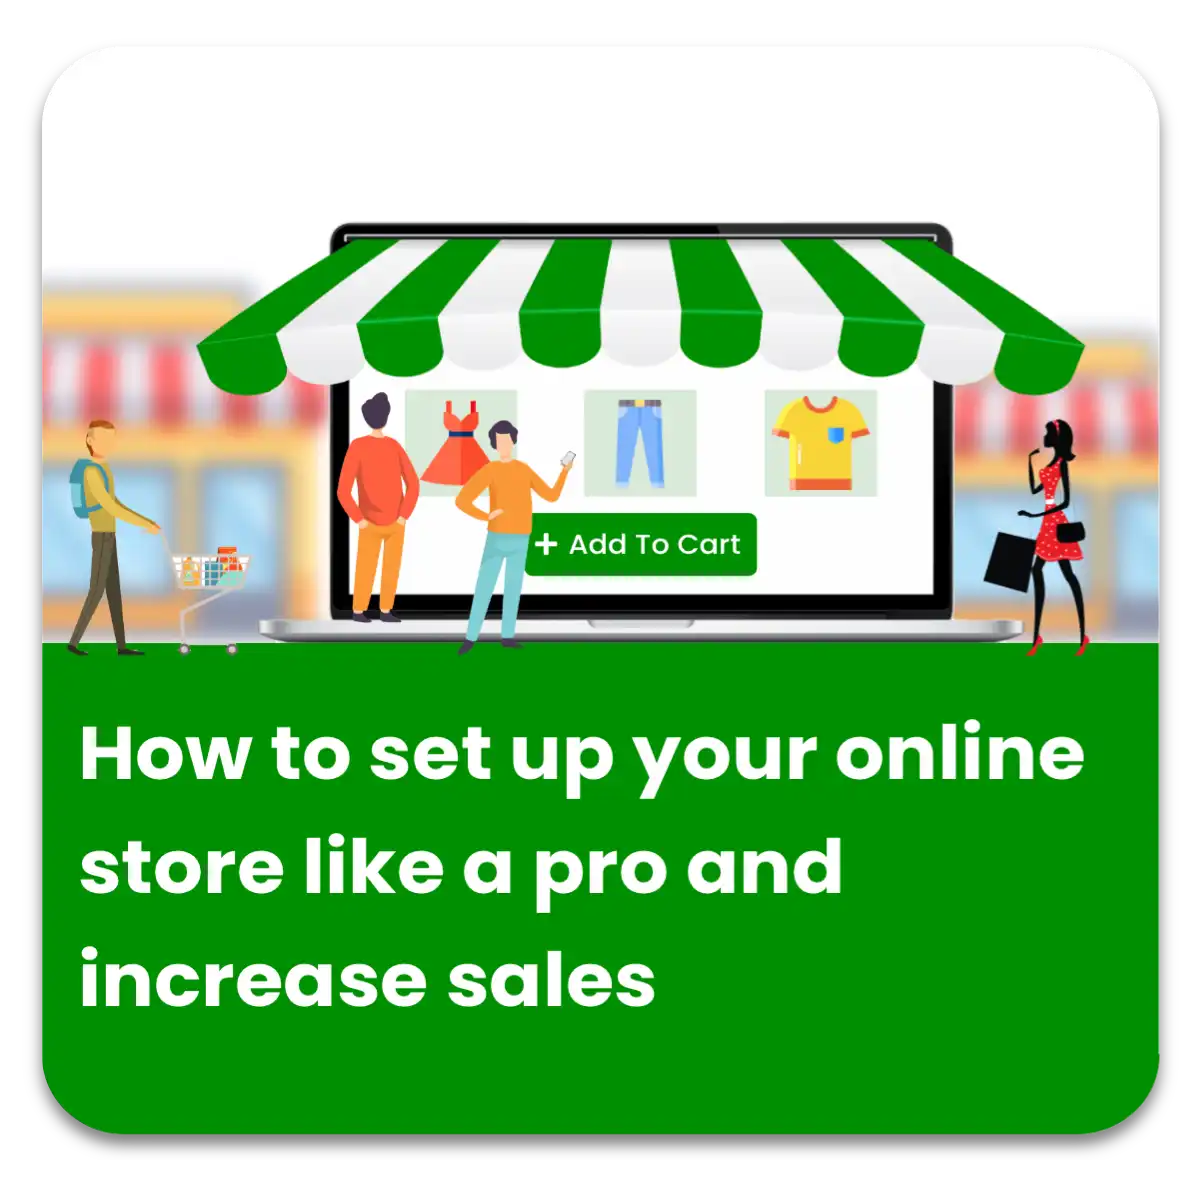 How to set up your online business like a pro and increase sales | MyEasyStore Blog